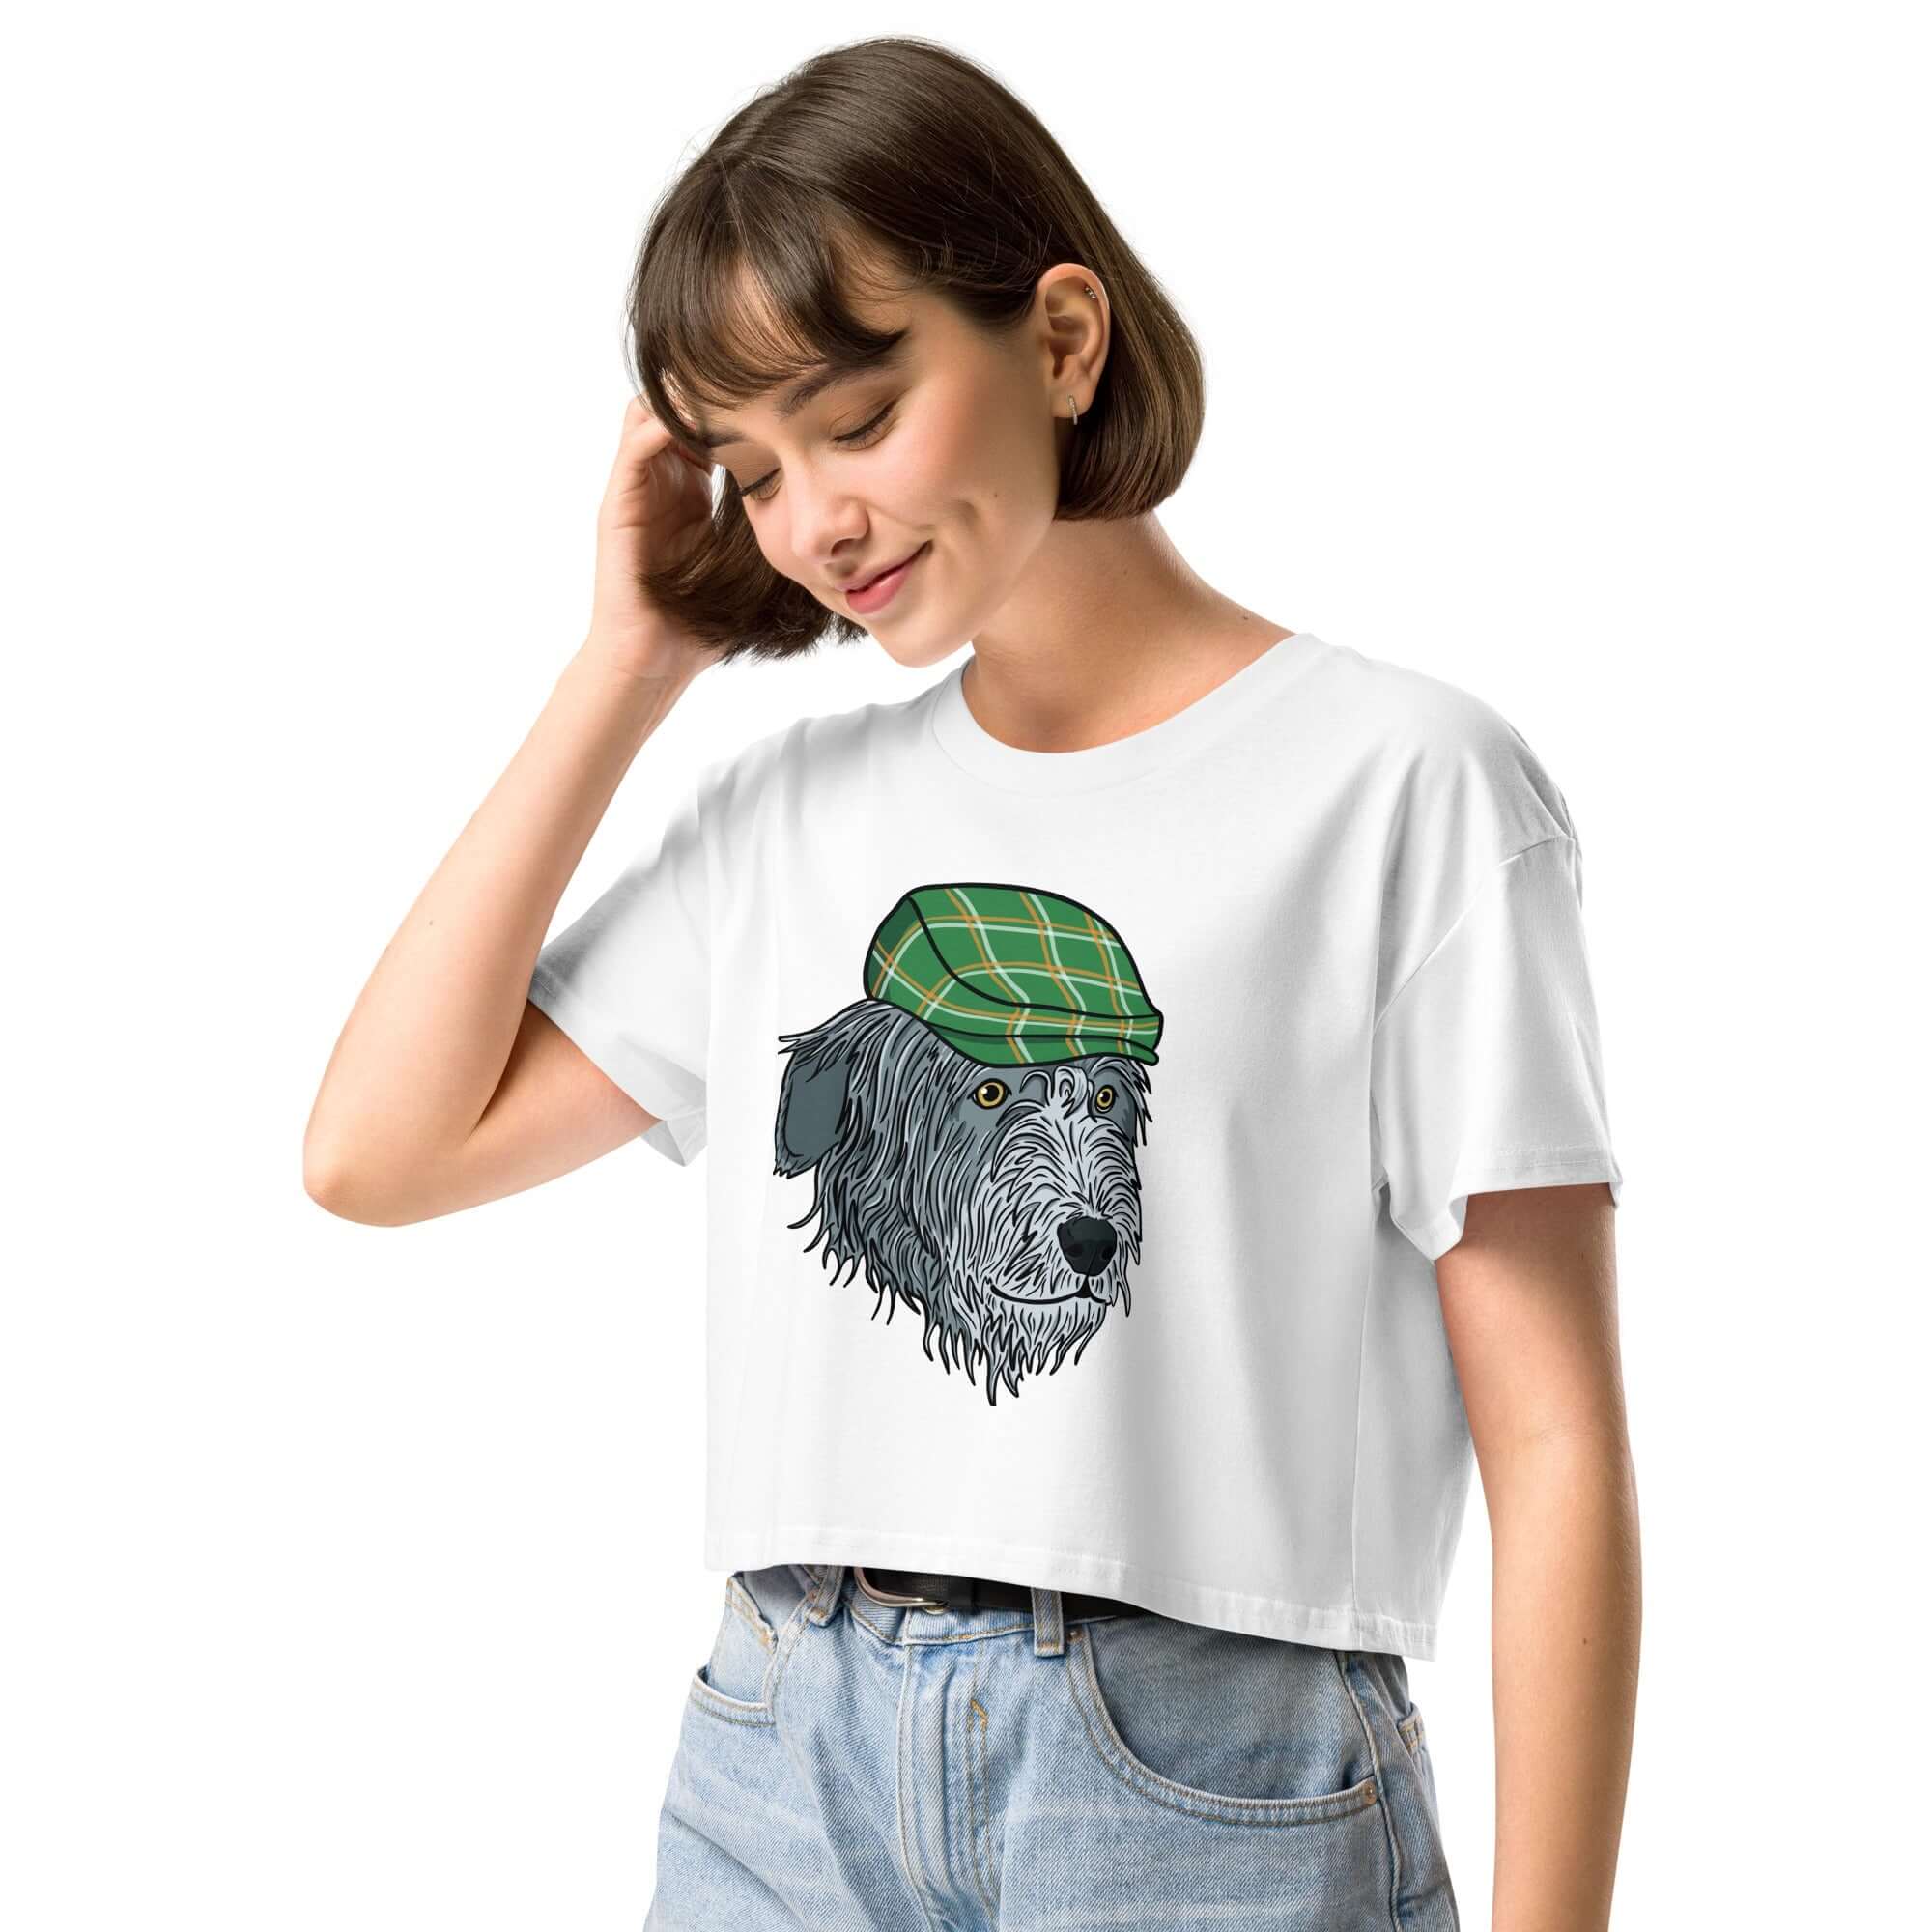 Irish Wolfhound Crop Top - TAILWAGS UNLIMITED